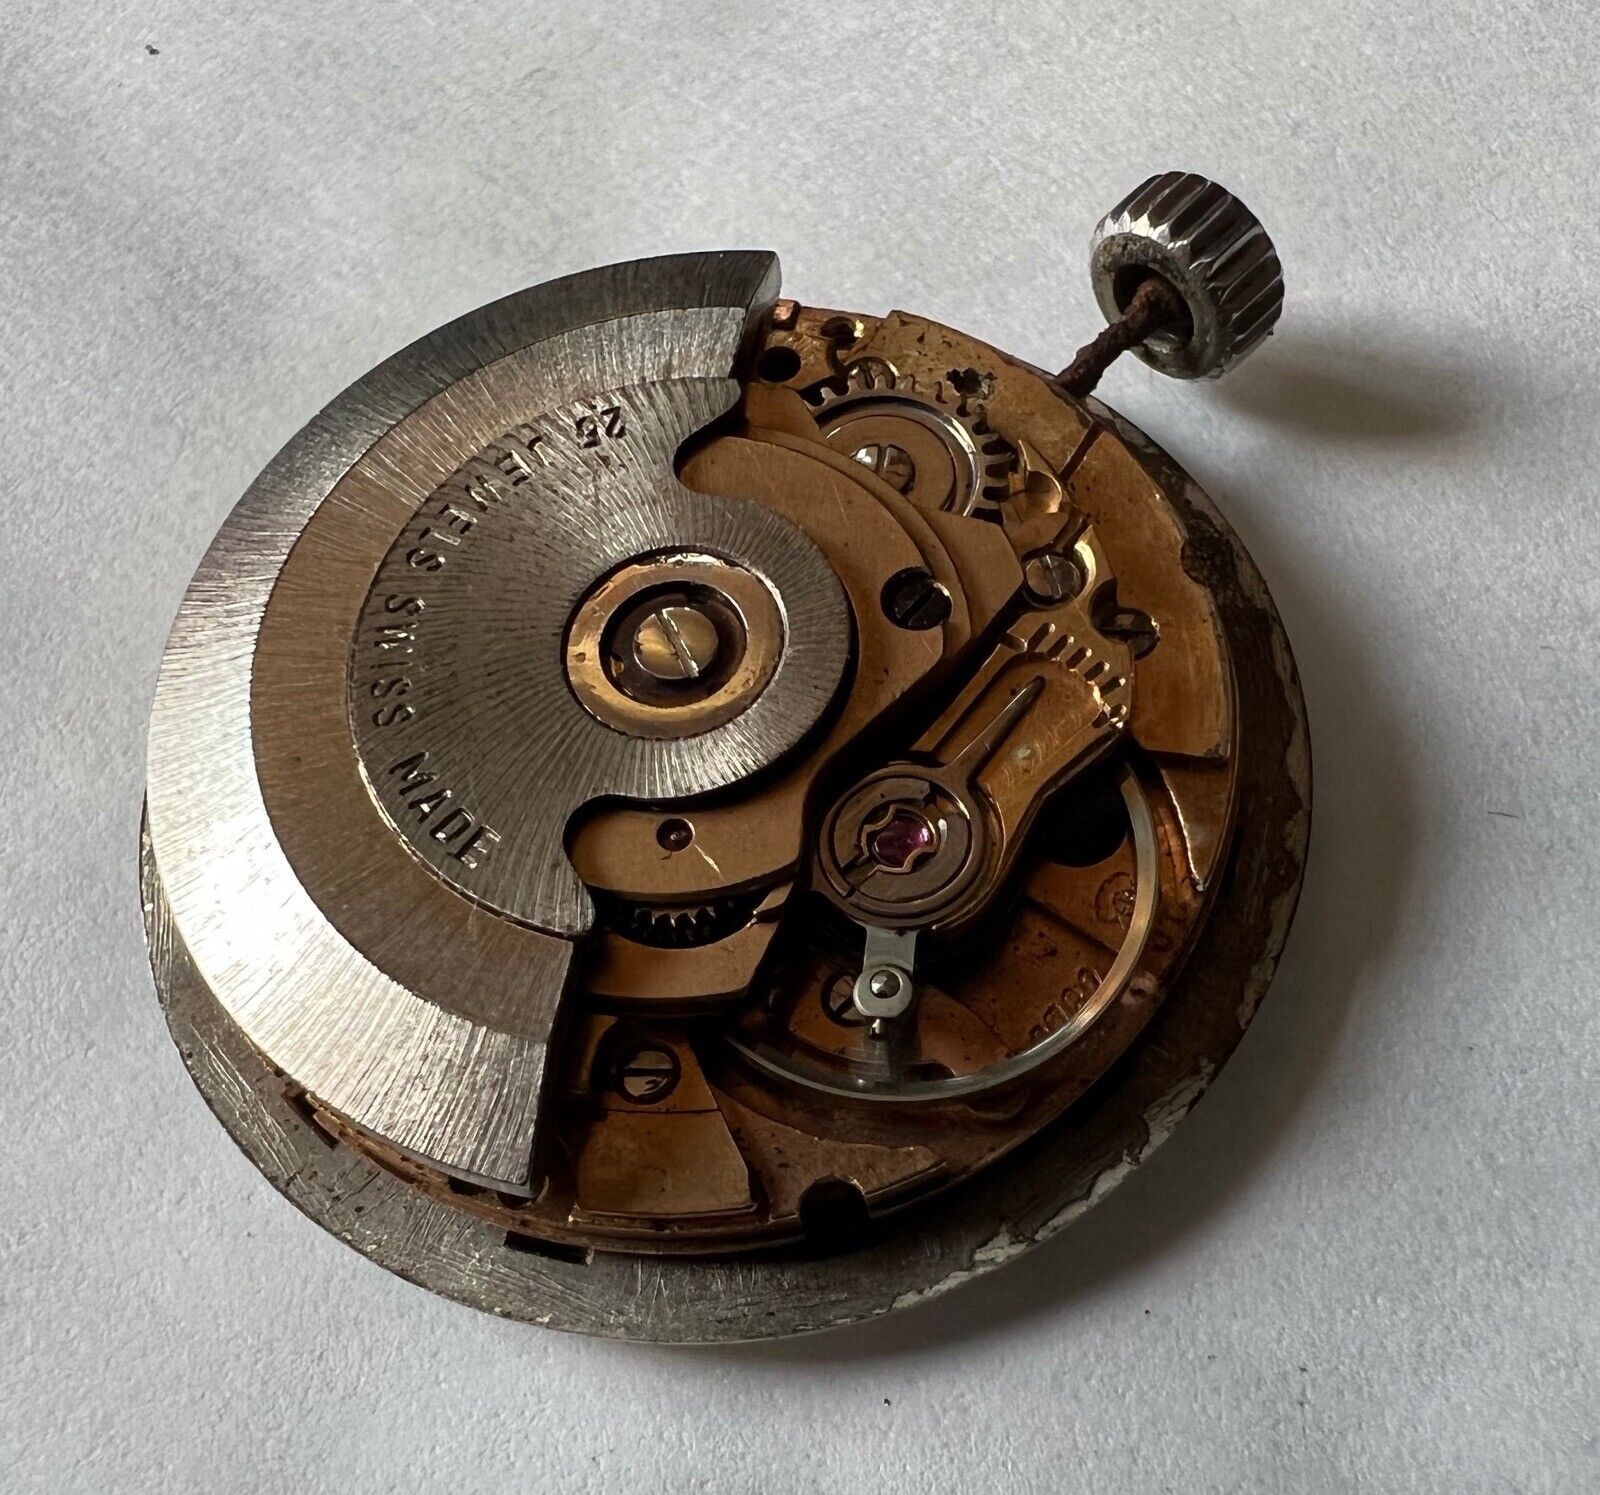 Eta 2782 Majestic Automatic for Restore for Parts Vintage Watch Movement Watch